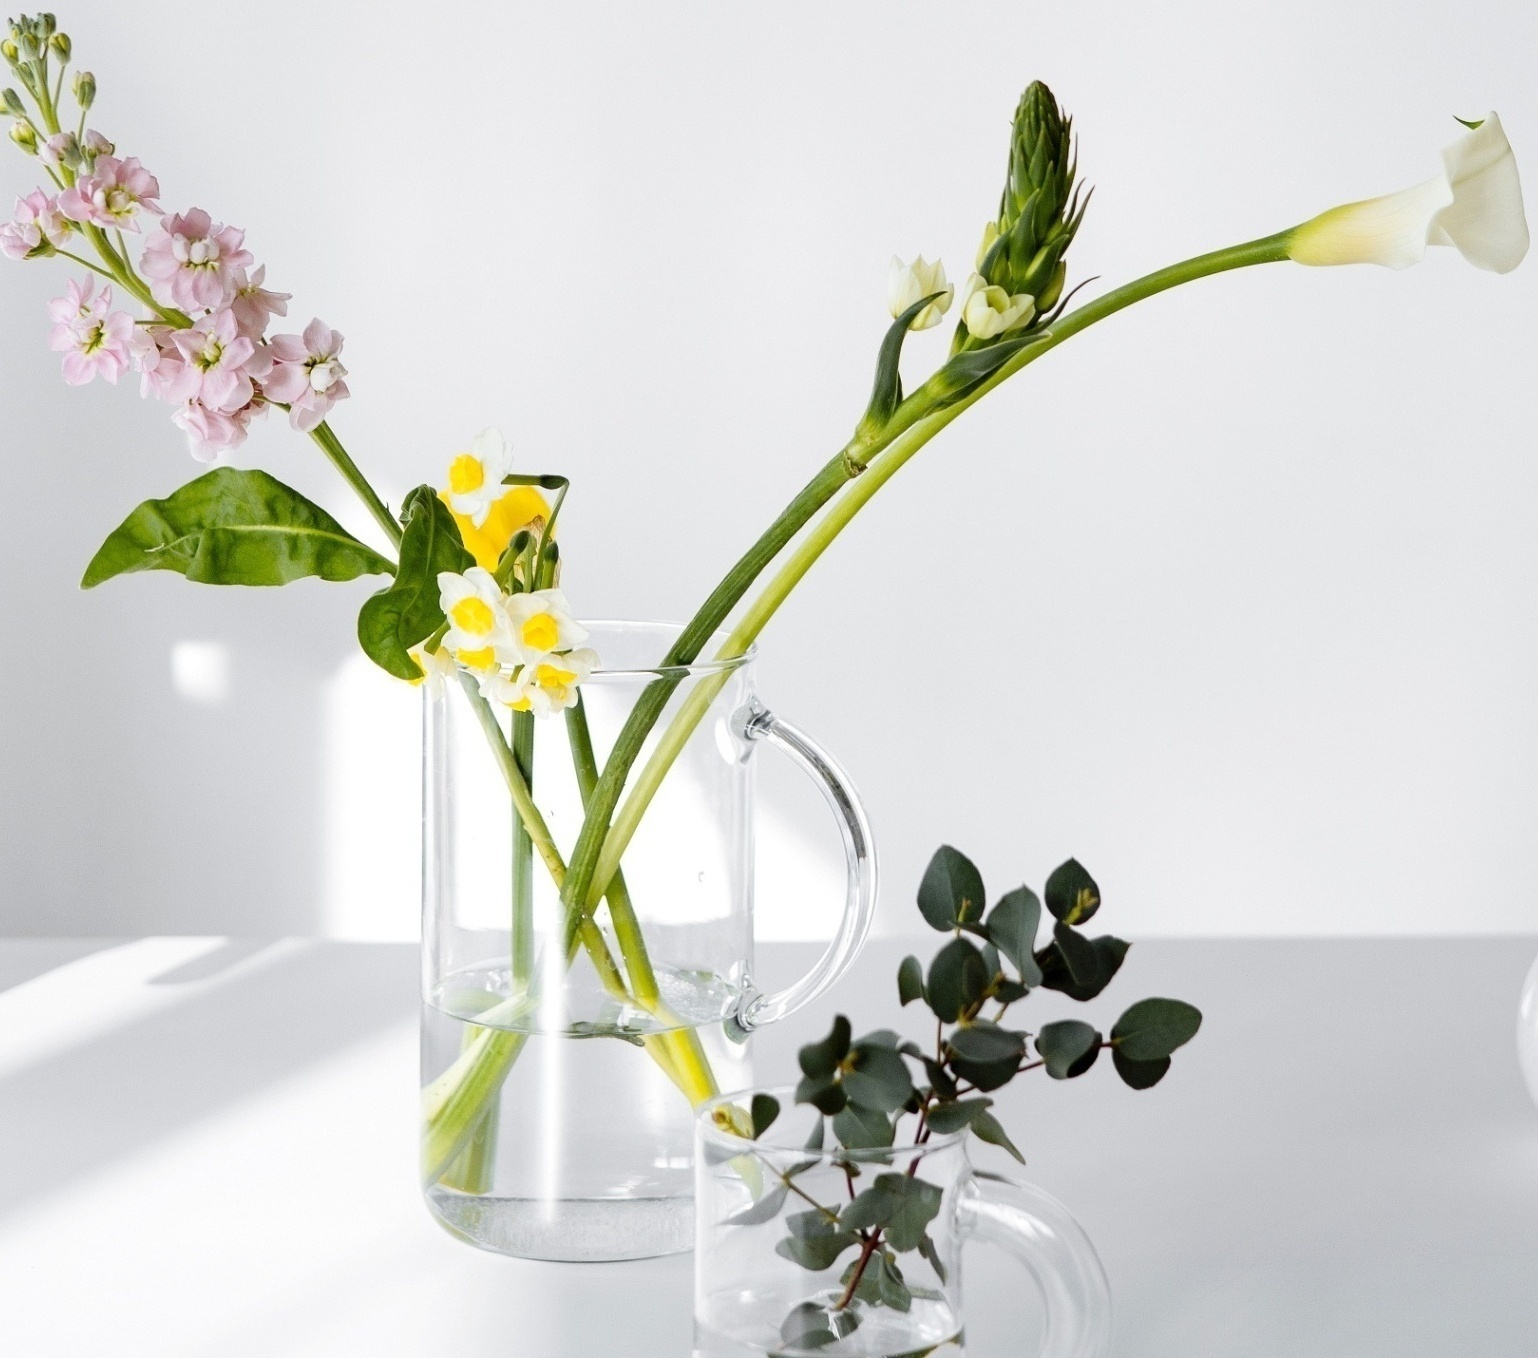 Image of a glass pitcher and cup with flowers in them in front of a white background. We are her for you with life transitions therapy in Orlando, FL 33701. You dont have to go through change alone with the support of a life transitions therapist in Orlando, Florida. Whether its moving, a job or something else you will get support in life transition counseling in Winter Park, FL 33601. Call today! 